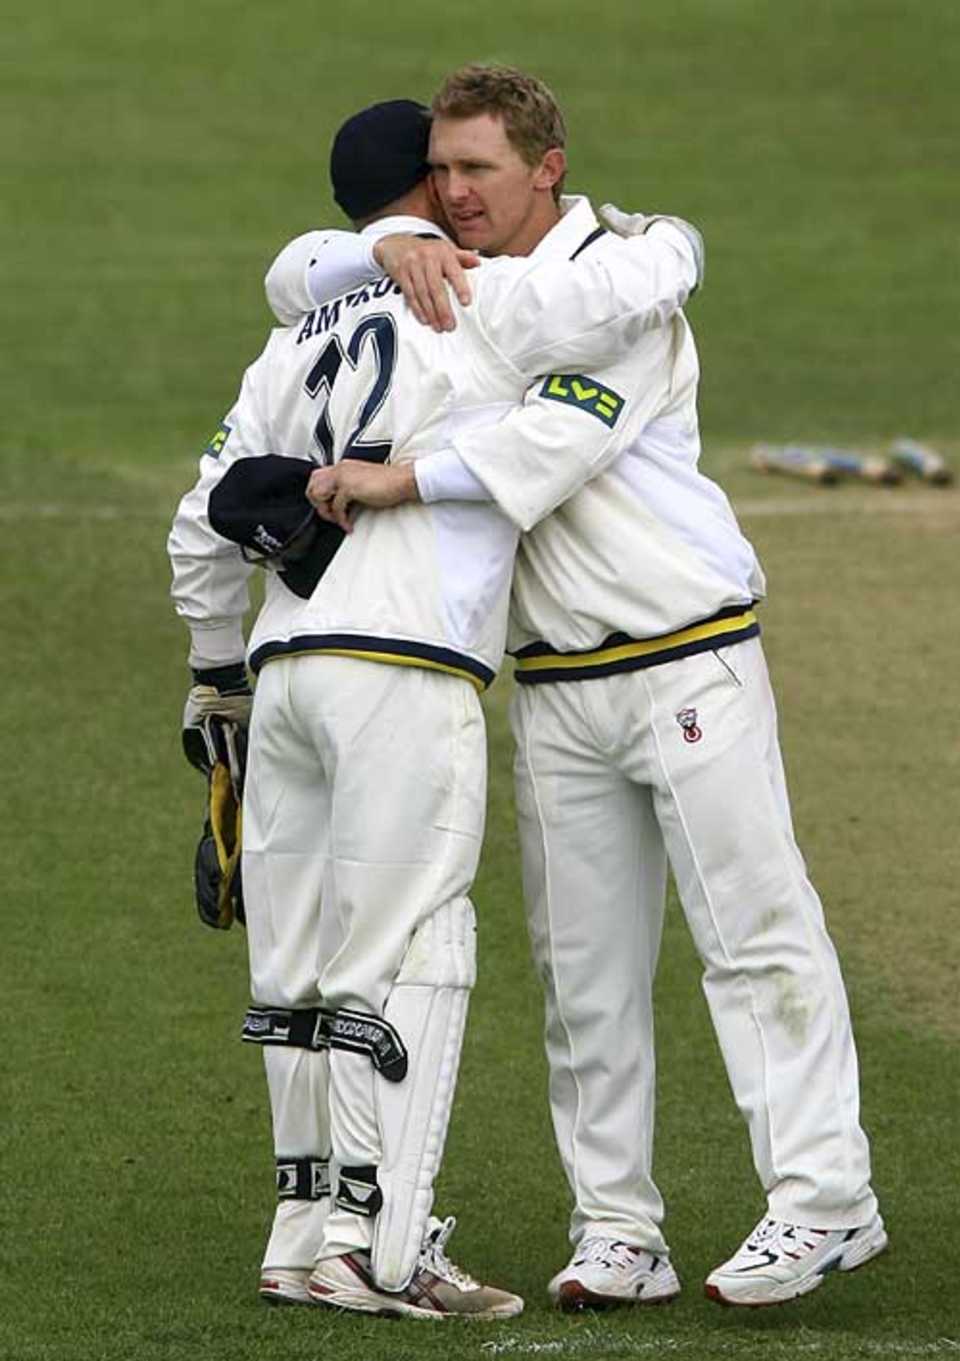 Darren Maddy celebrates victory in his first match as Warwickshire captain with Tim Ambrose, Warwickshire v Sussex, County Championship, Division One, Edgbaston, April 27, 2007